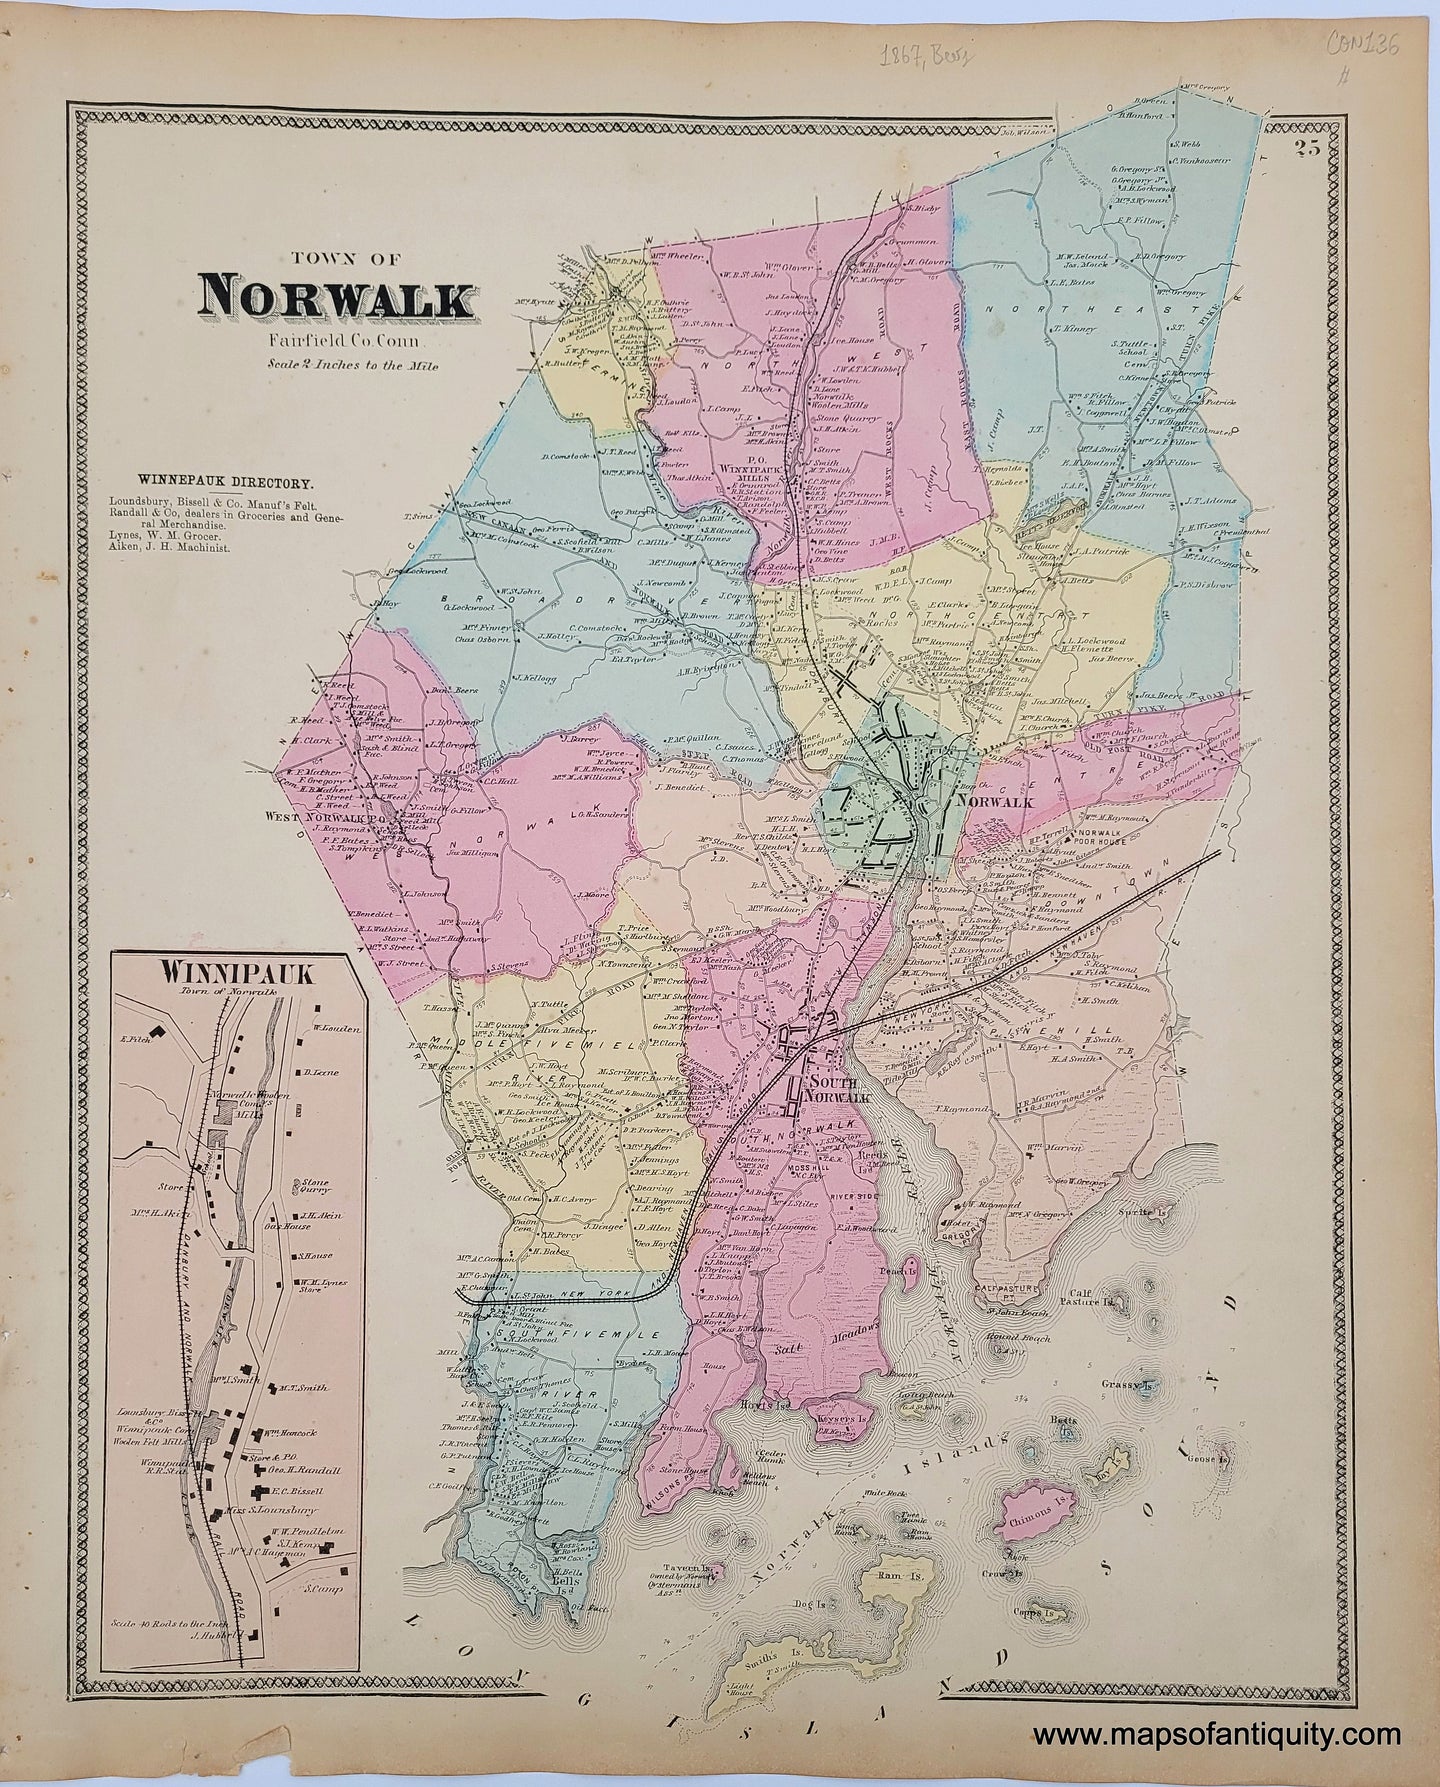 Antique-Map-Norwalk-Fairfield-County-Winnipauk-Connecticut-CT-1867-Beers-1860s-1800s-19th-century-Maps-of-Antiquity